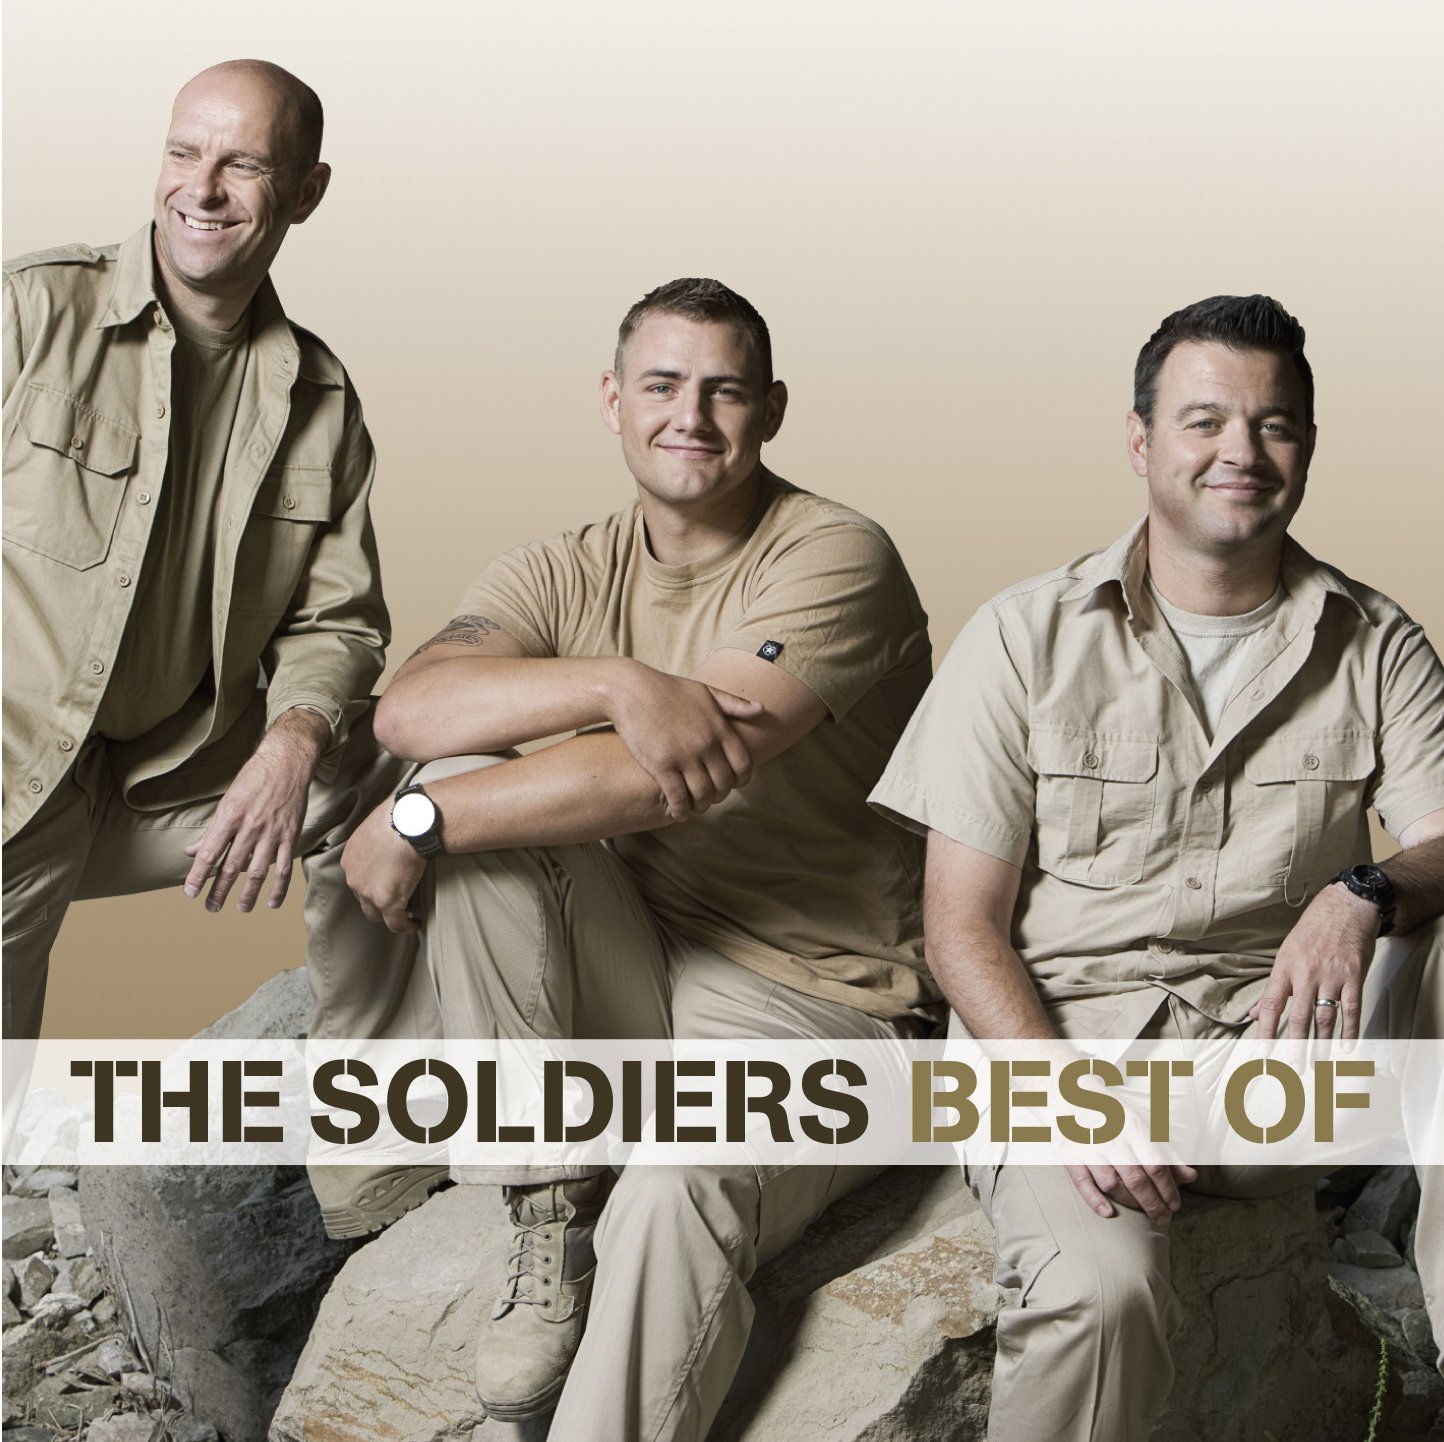 The soldiers photo